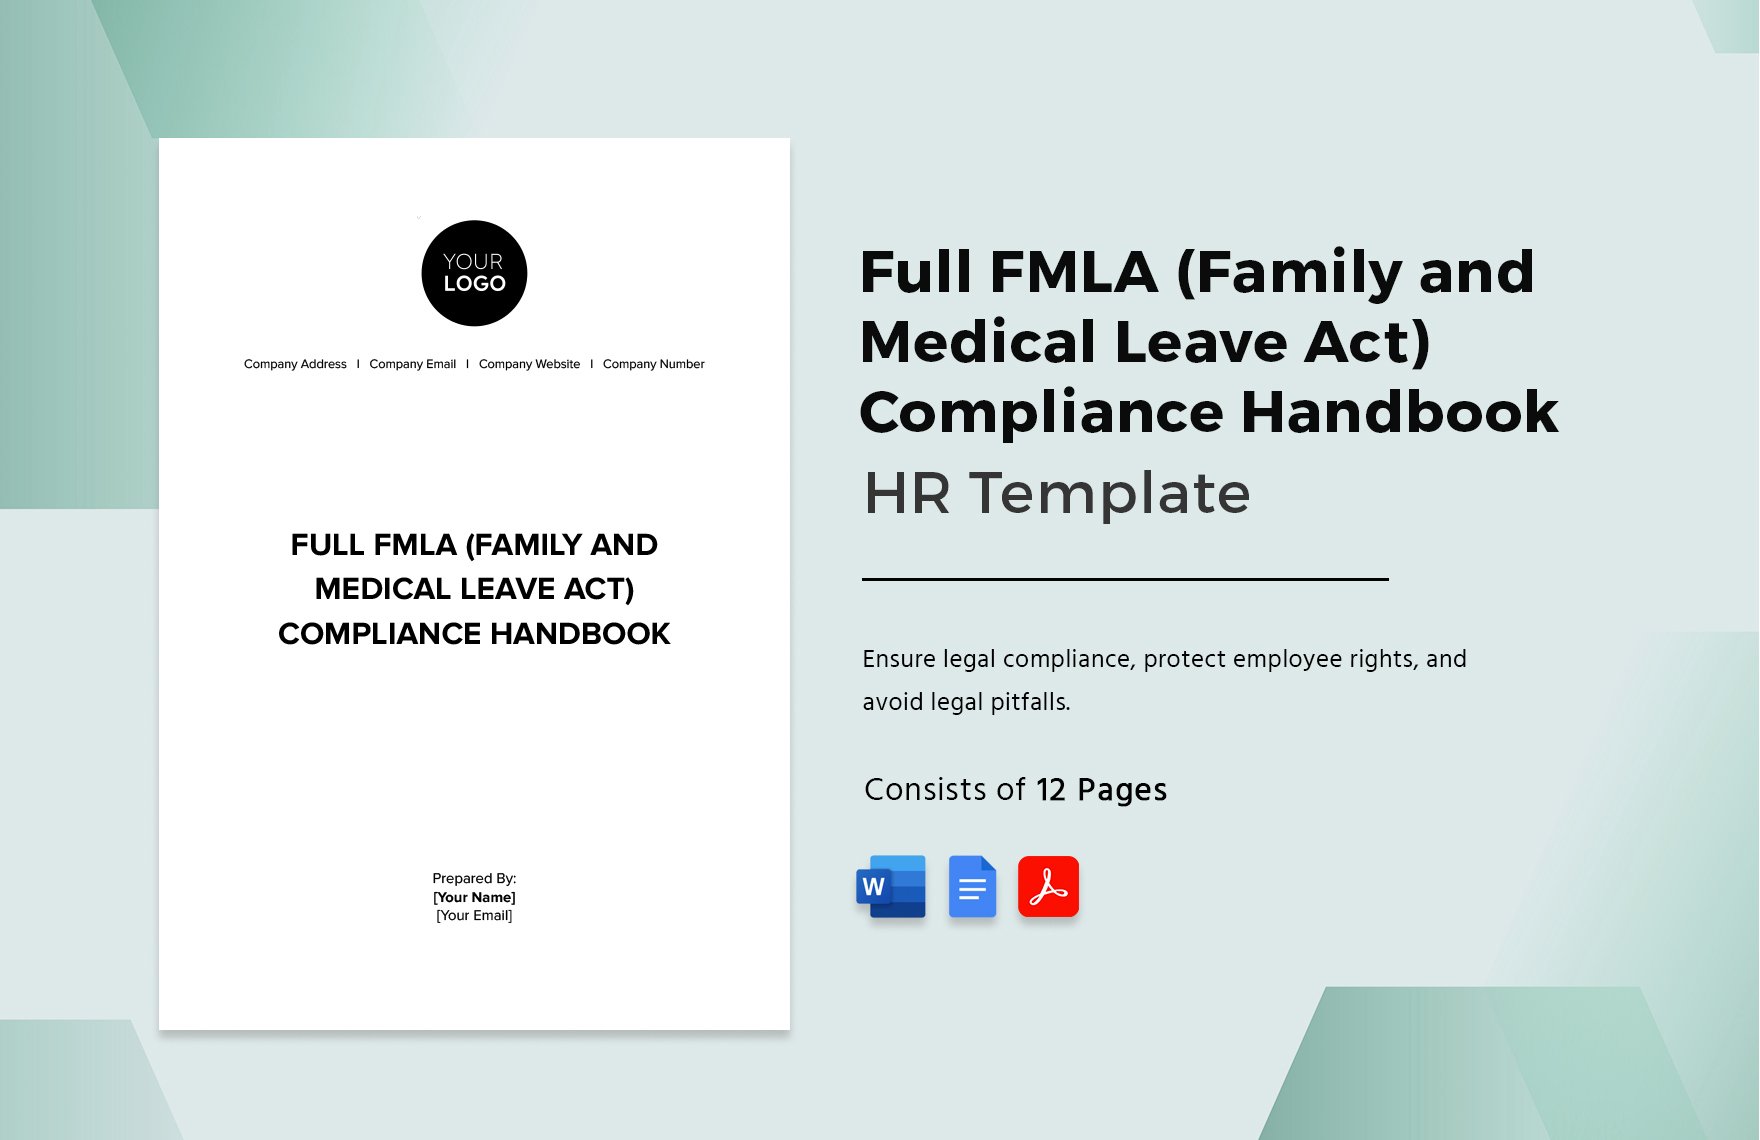 Full FMLA (Family and Medical Leave Act) Compliance Handbook HR Template in Word, Google Docs, PDF